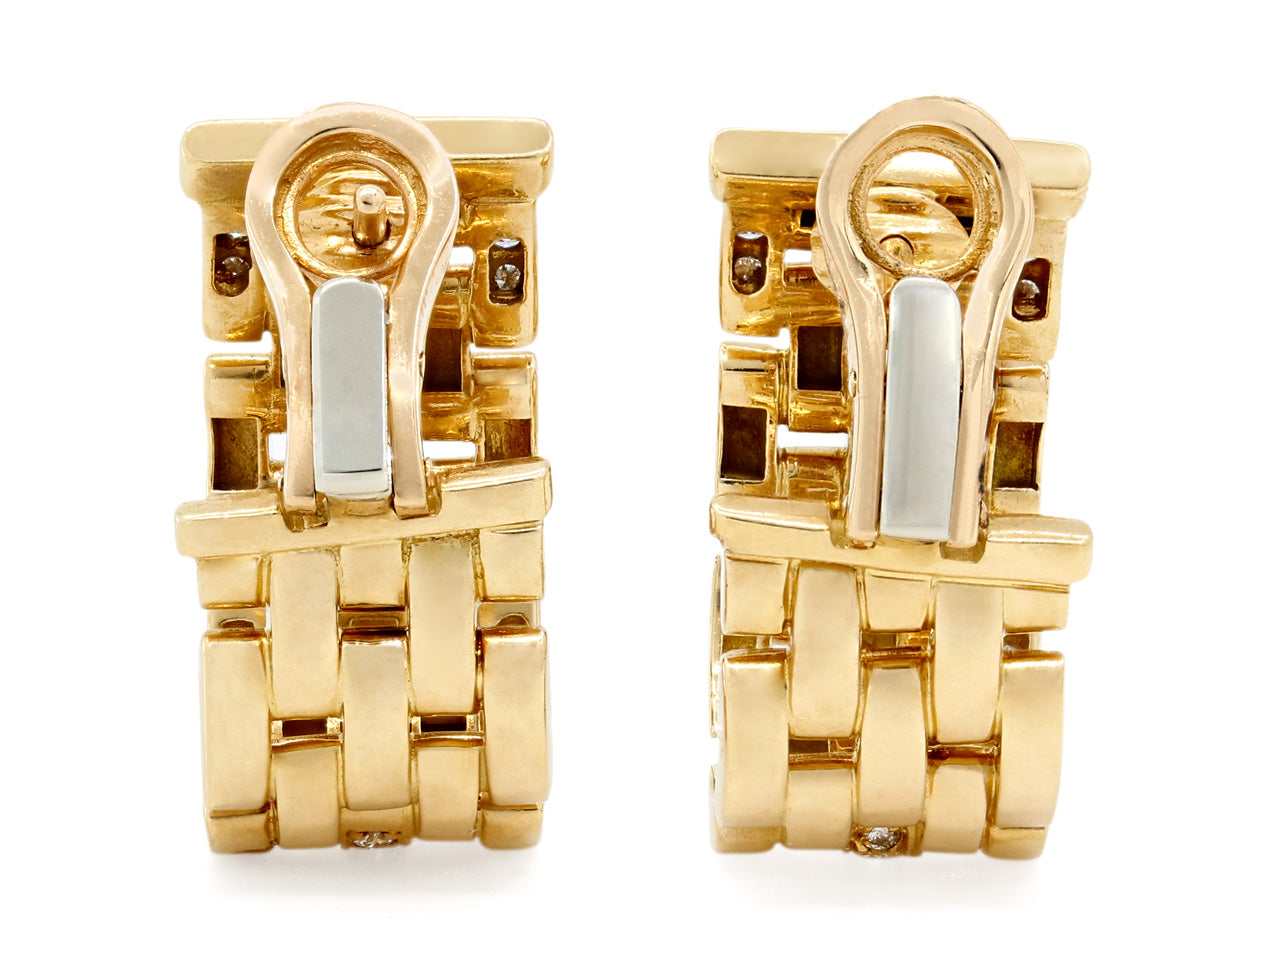 Cartier Panthere Maillon Diamond Earrings in 18K Gold